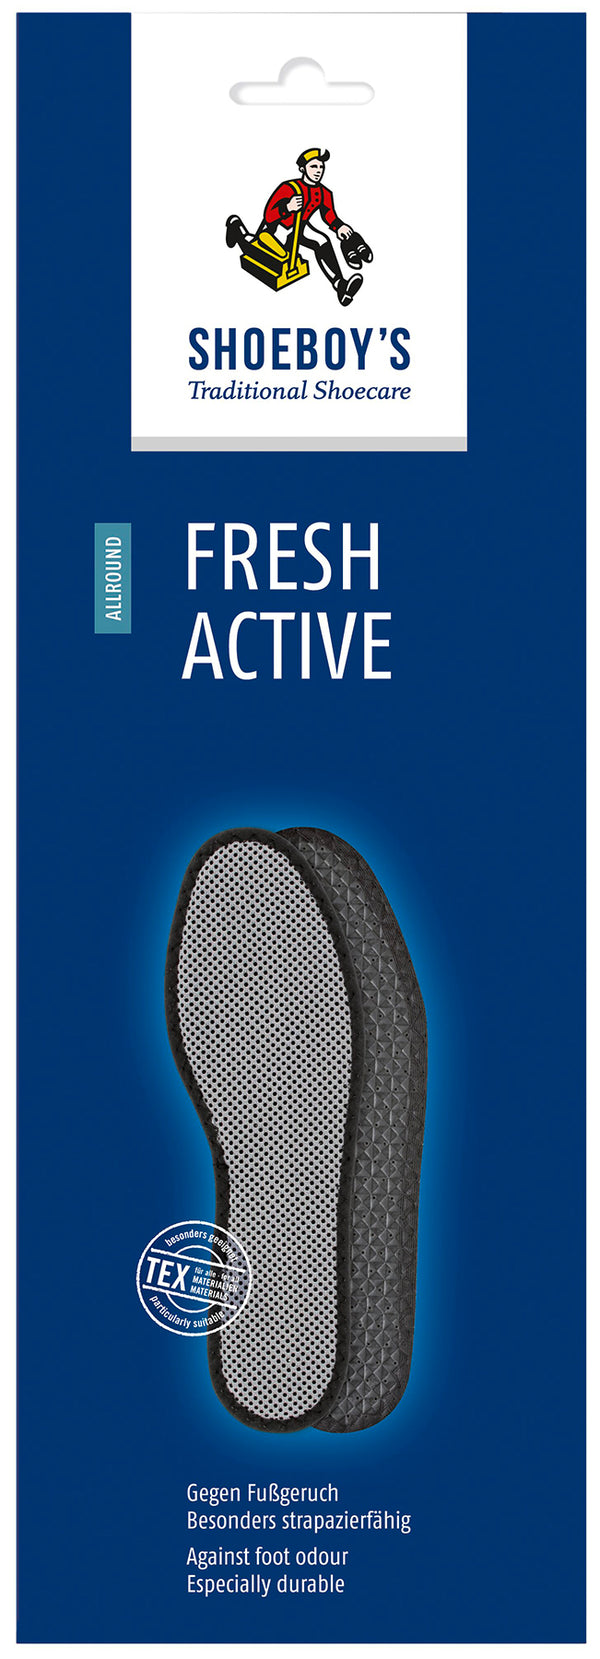 Shoeboy's Fresh Active Insoles - Activated Carbon Filter, Absorbs Foot Odor, Breathable Padded Polyester Fabric, Anti Slip - Women's - Trustables